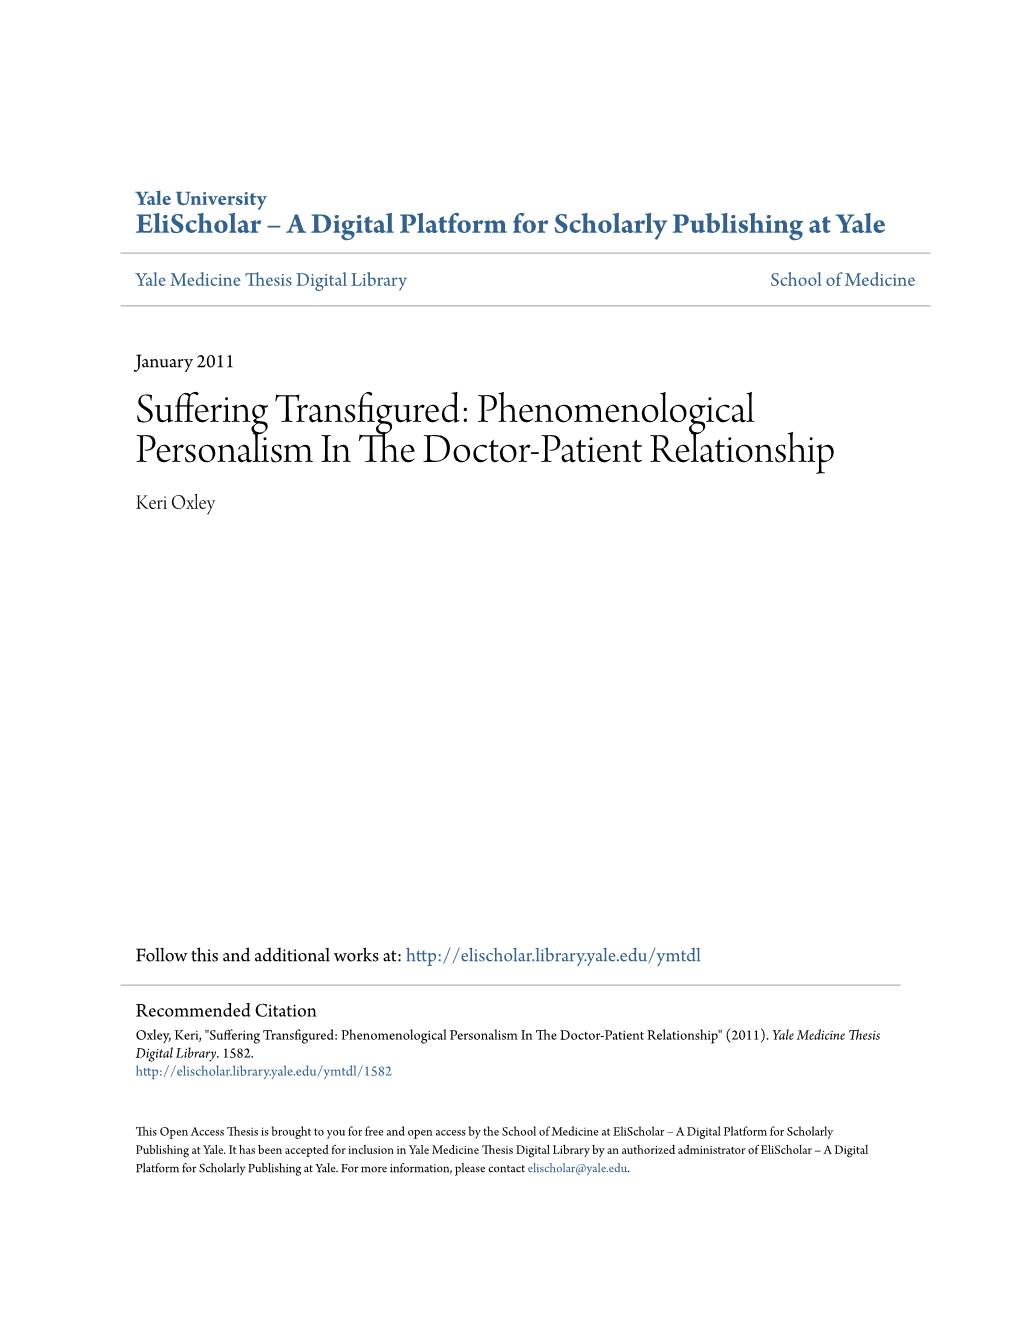 Phenomenological Personalism in the Doctor-Patient Relationship